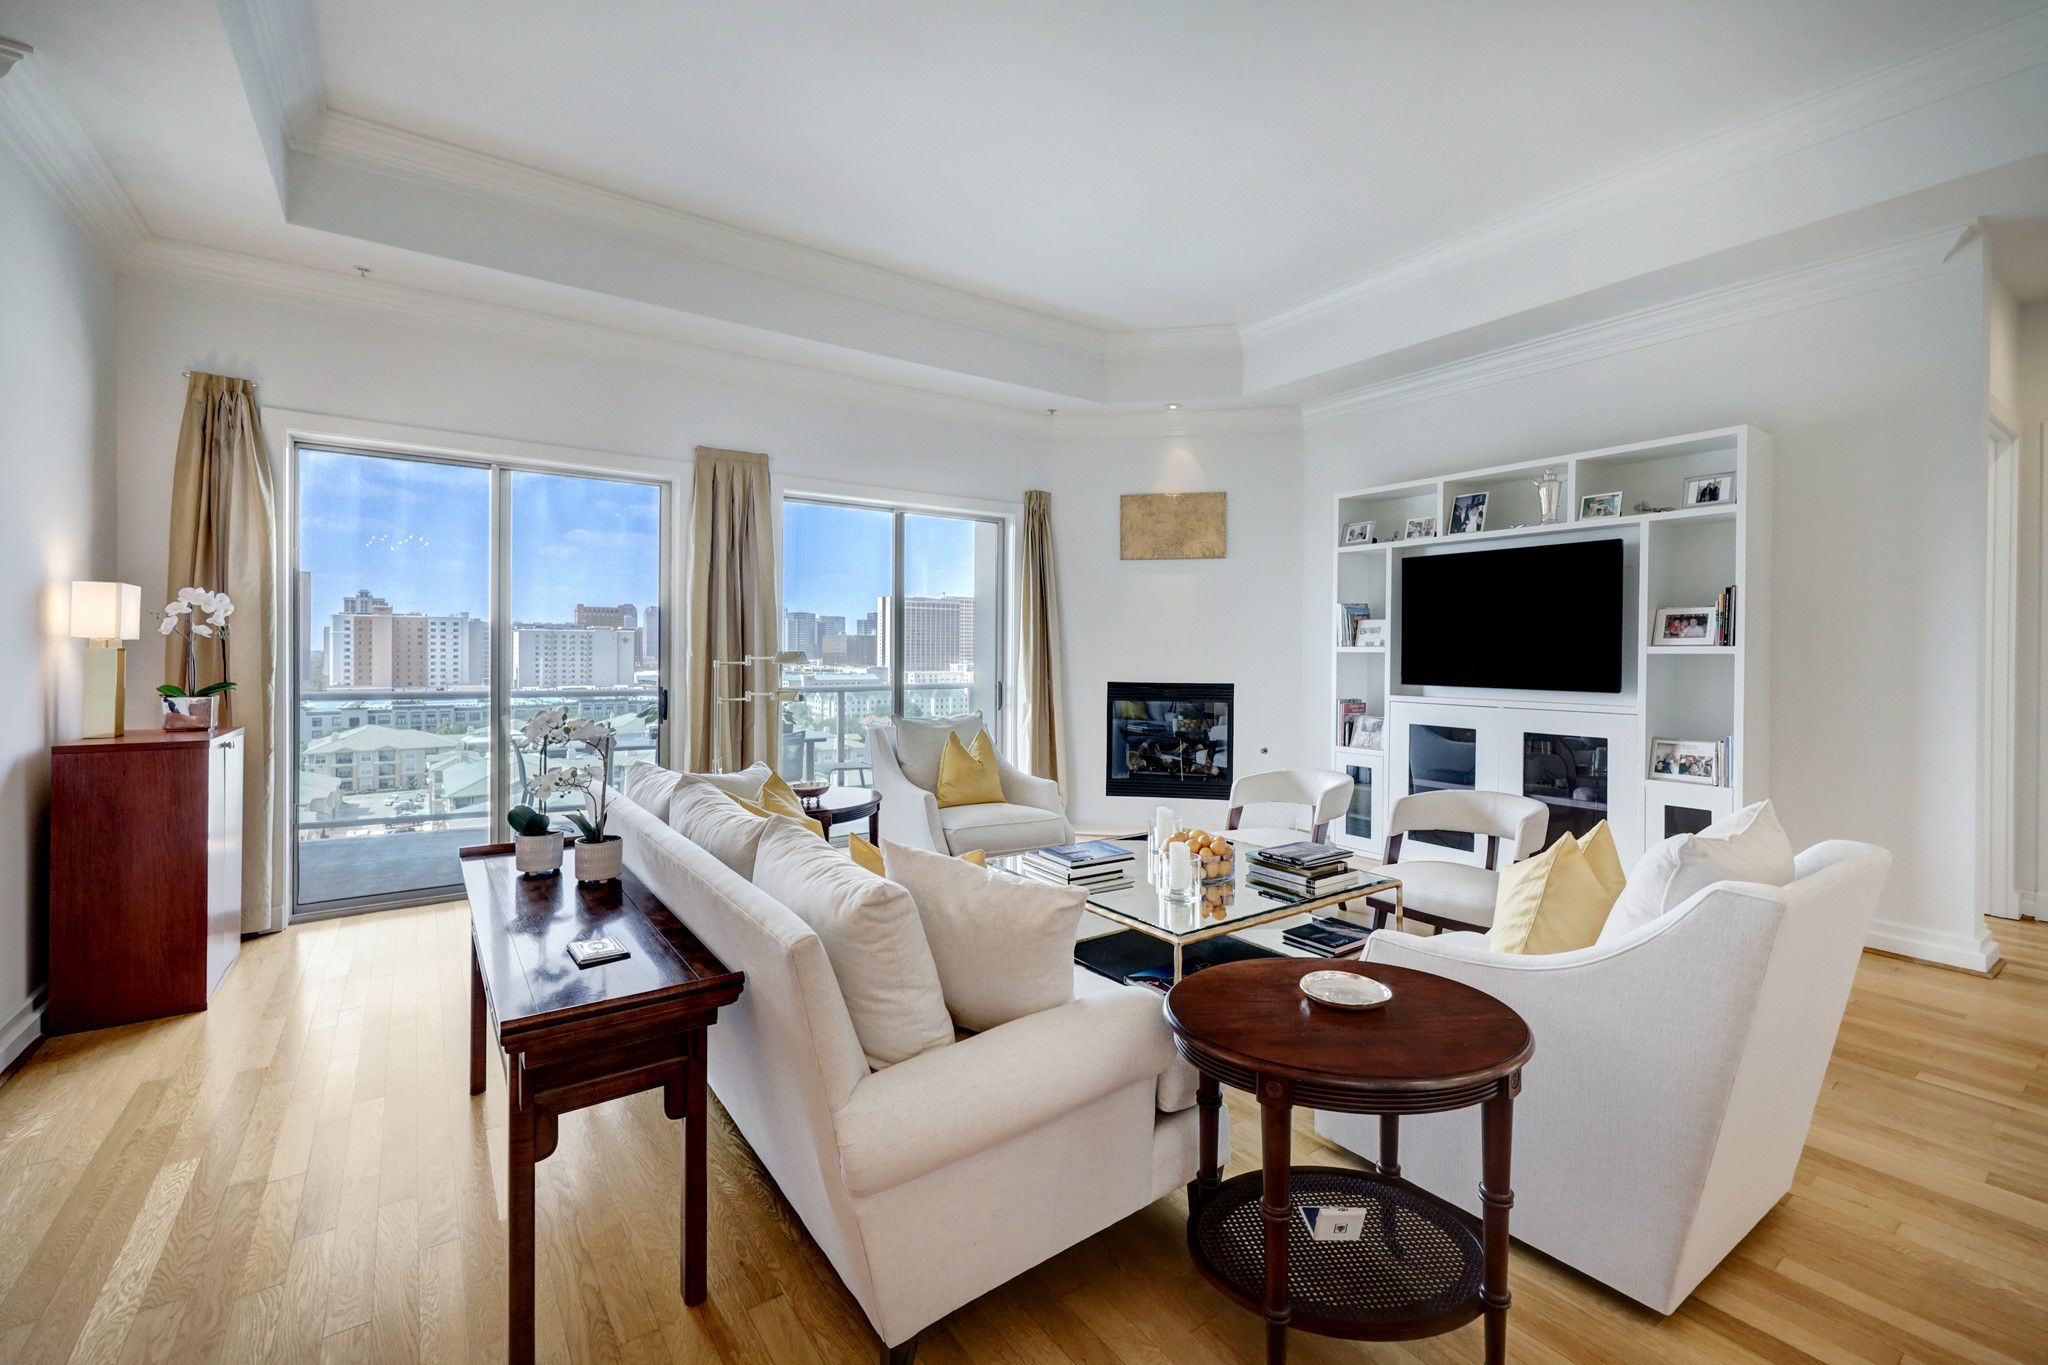 Light filled living area with views to the north looking over the Galleria and Williams Tower. Tall windows with double sliding doors opening to balcony.